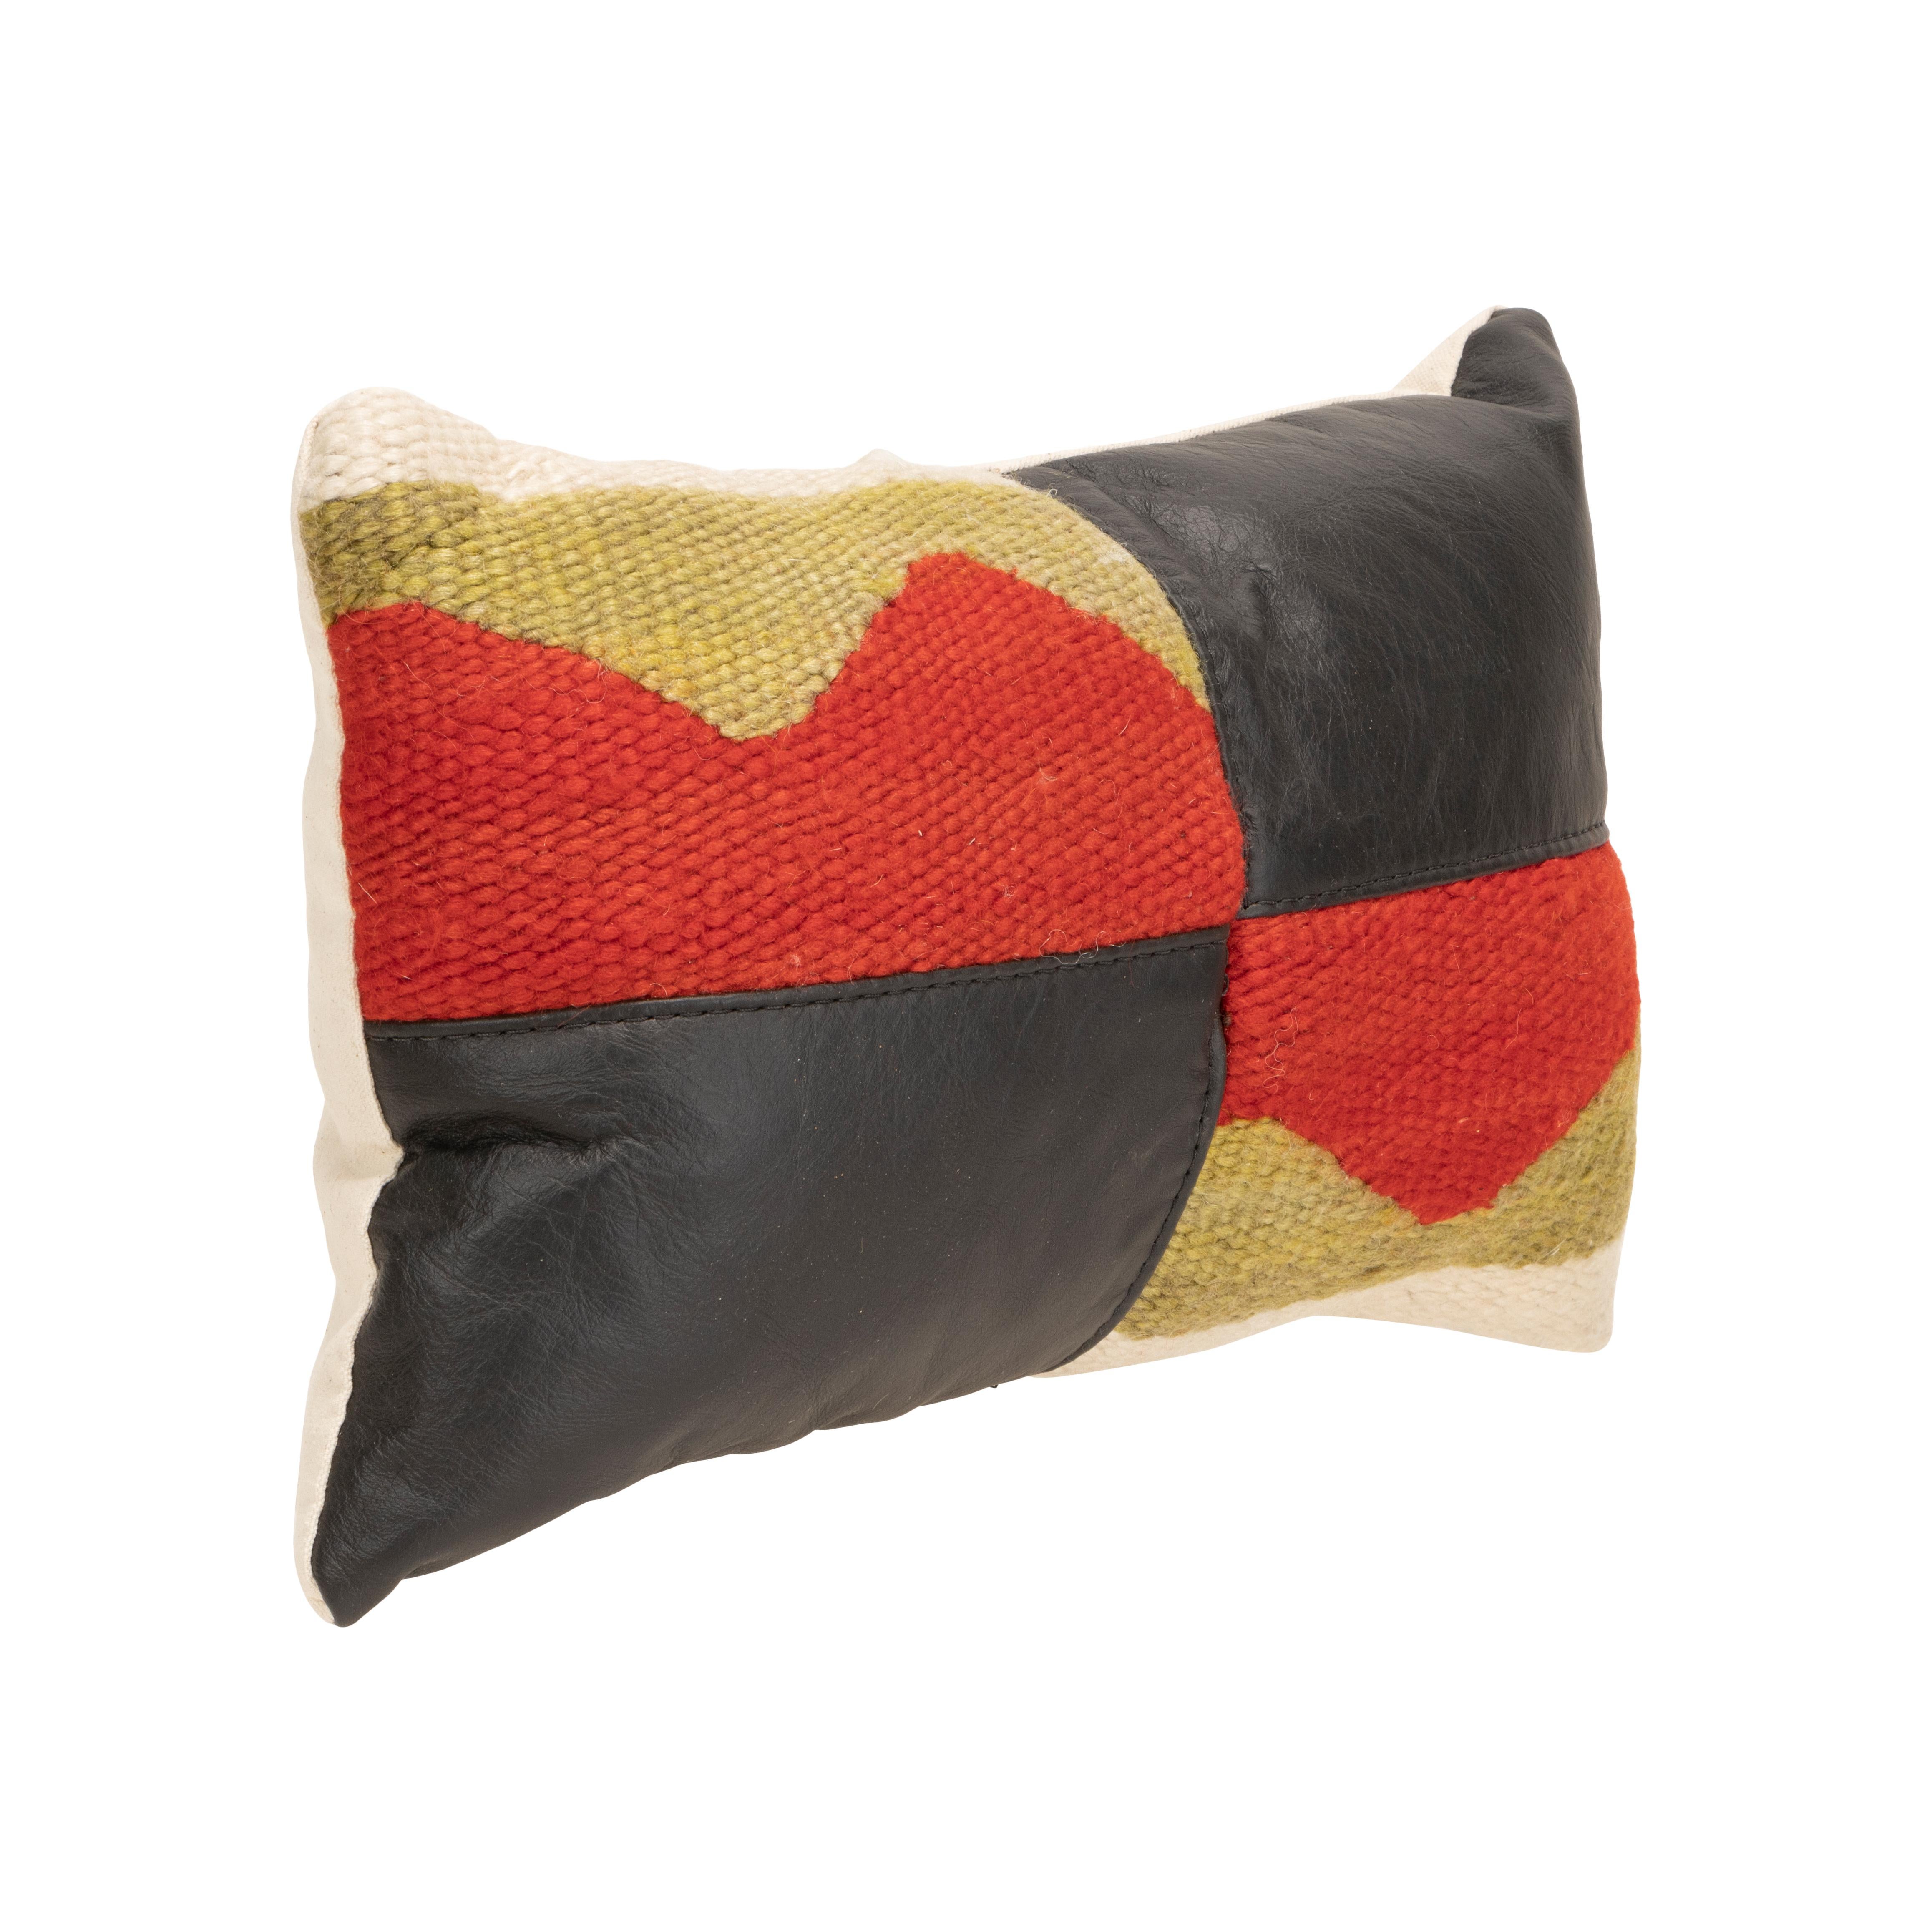 Native American Navajo Transitional Pillow For Sale